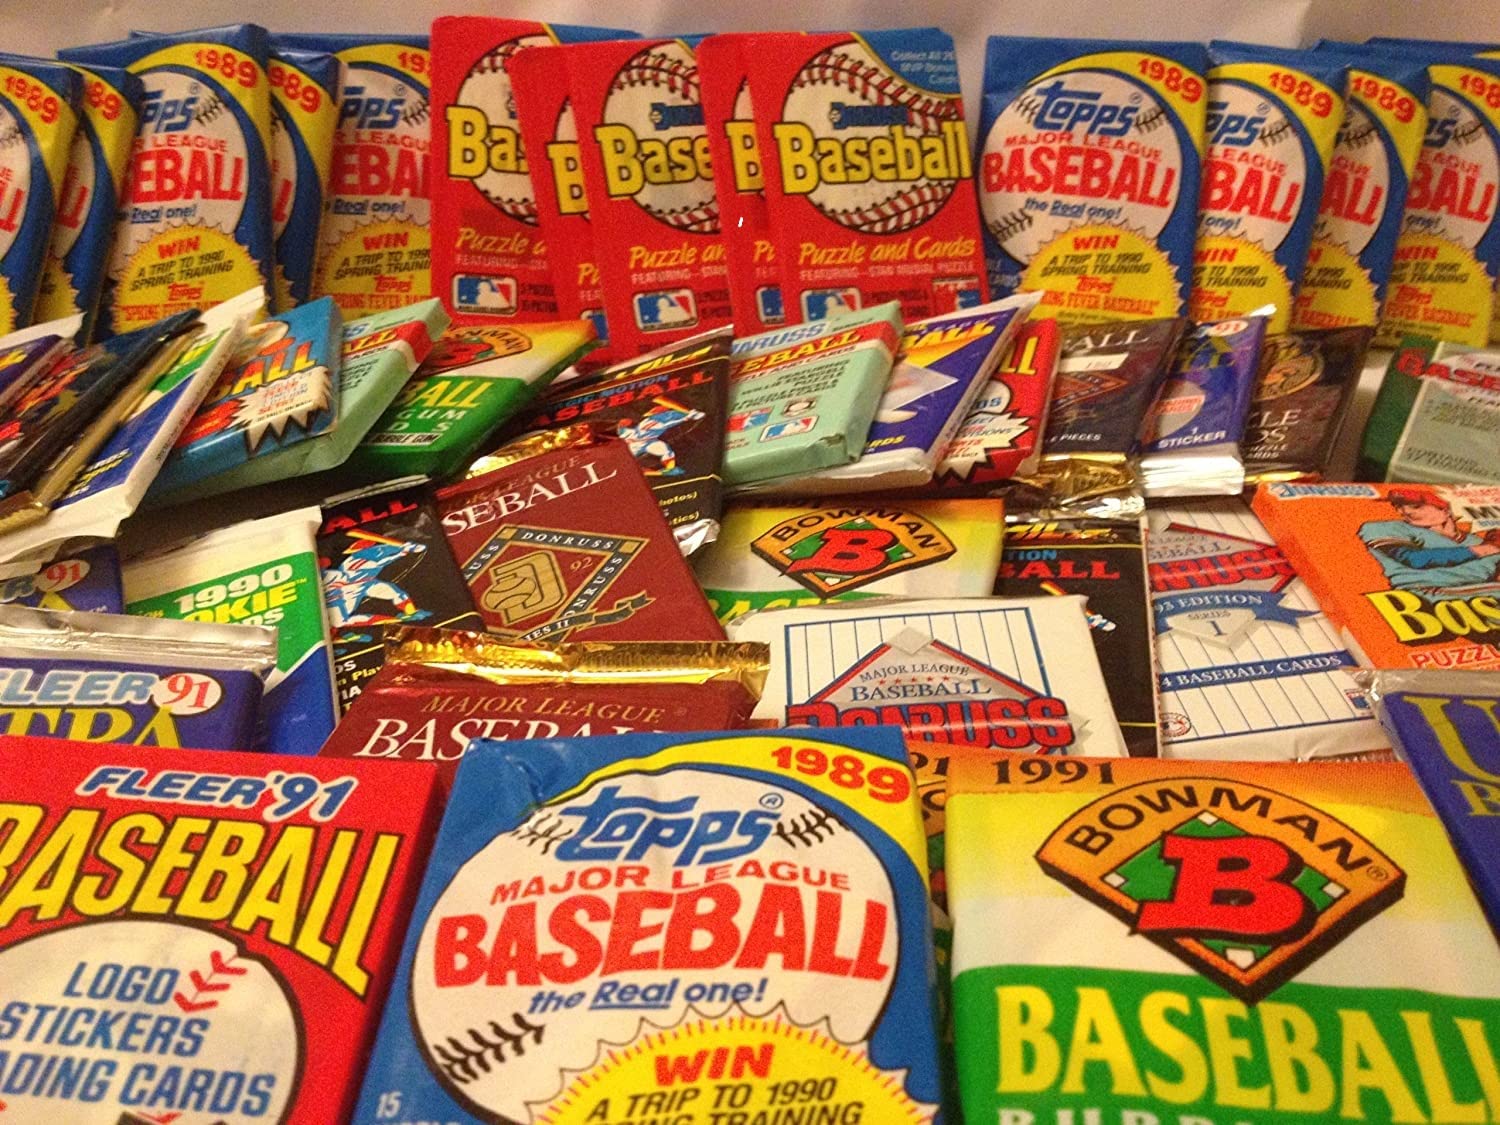 TOP 15 Highest Selling Baseball Cards from the Junk Wax Era on